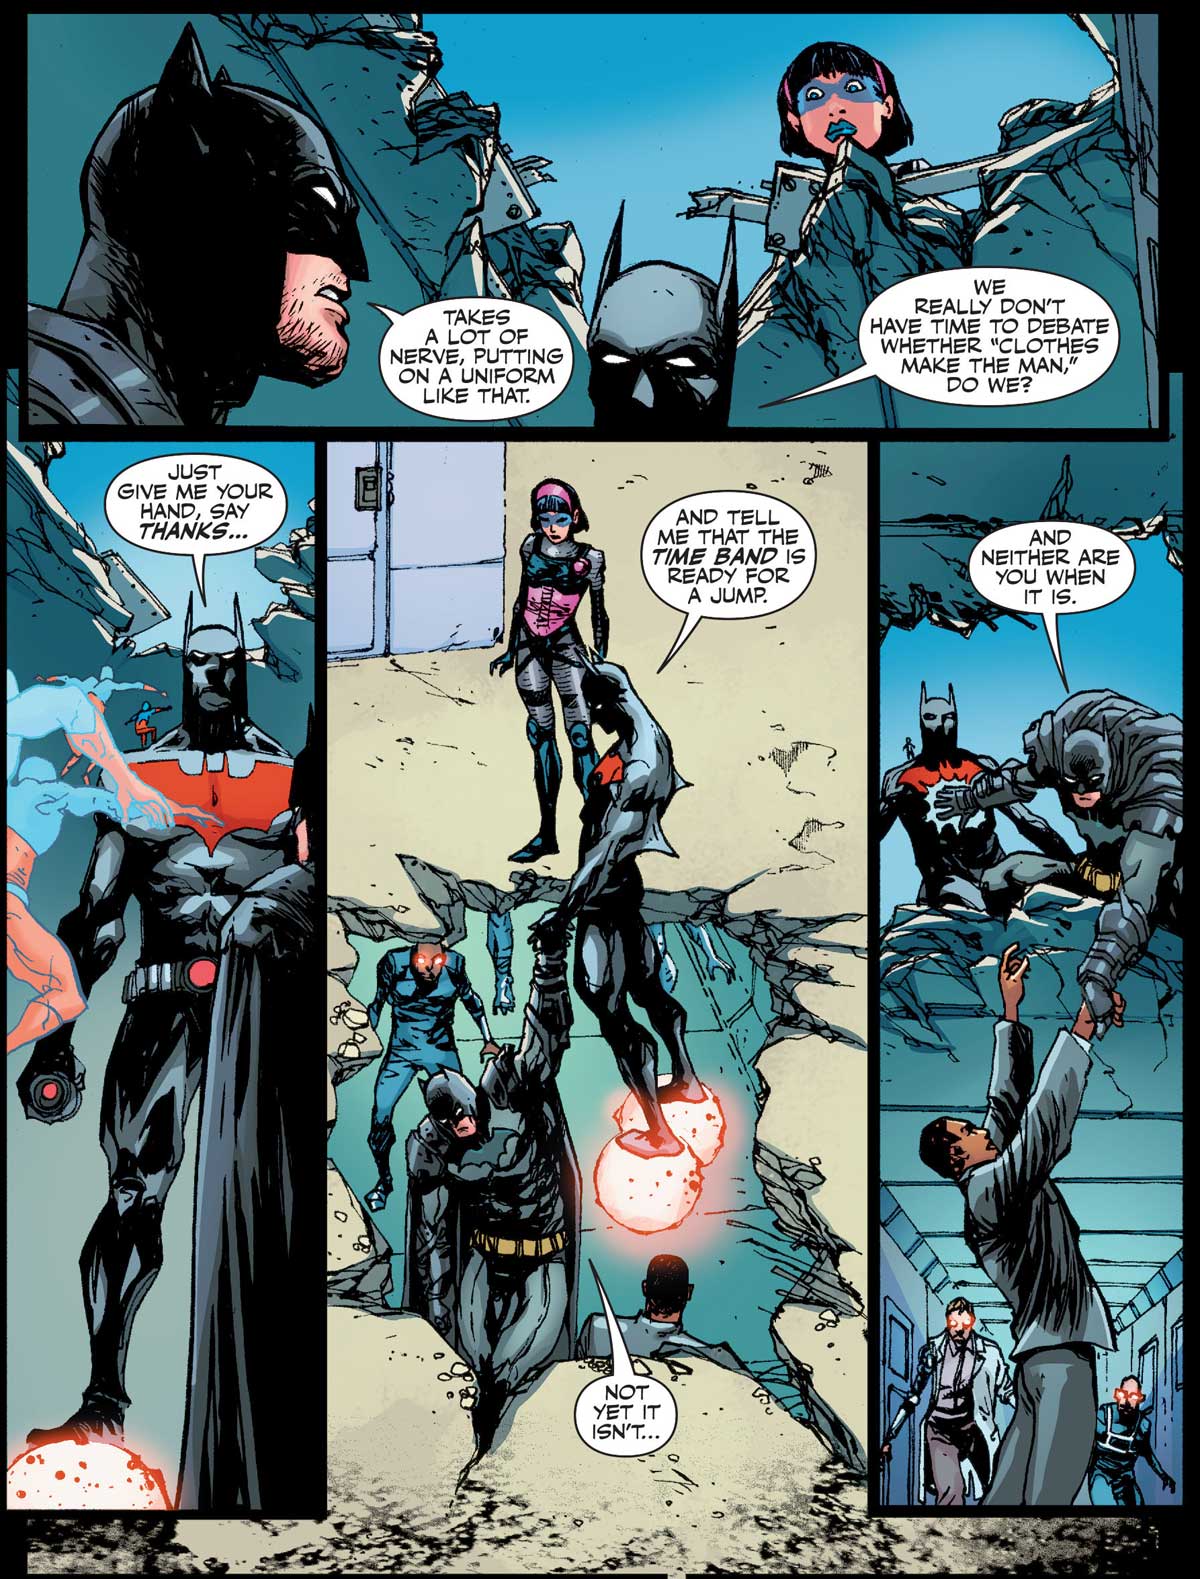 New 52 Futures End #47